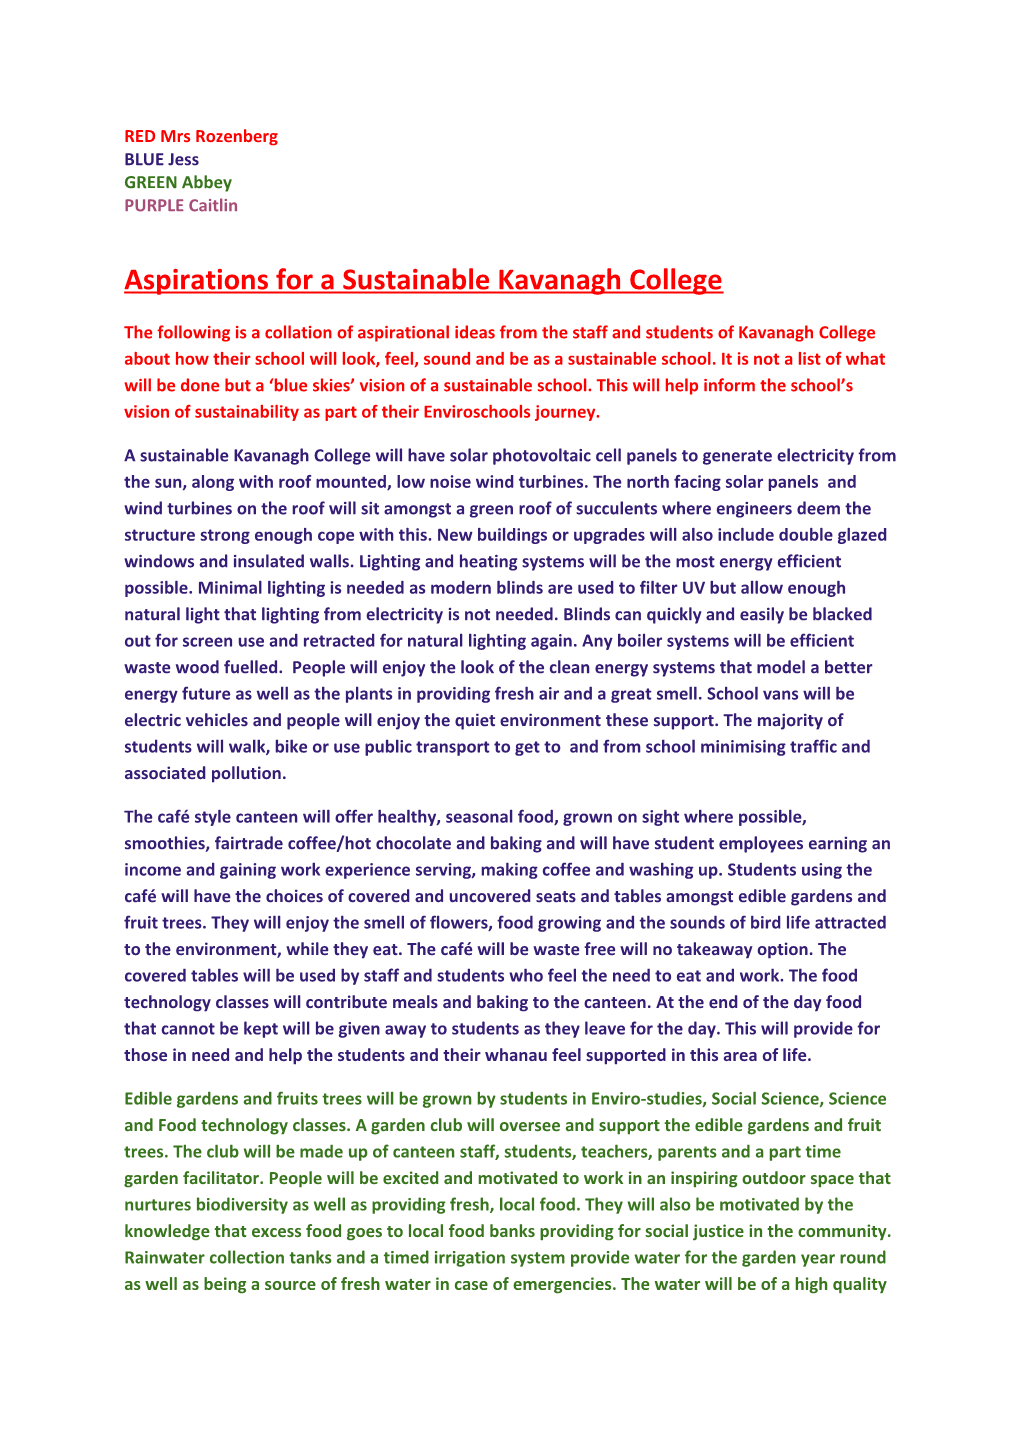 Aspirations for a Sustainable Kavanagh College